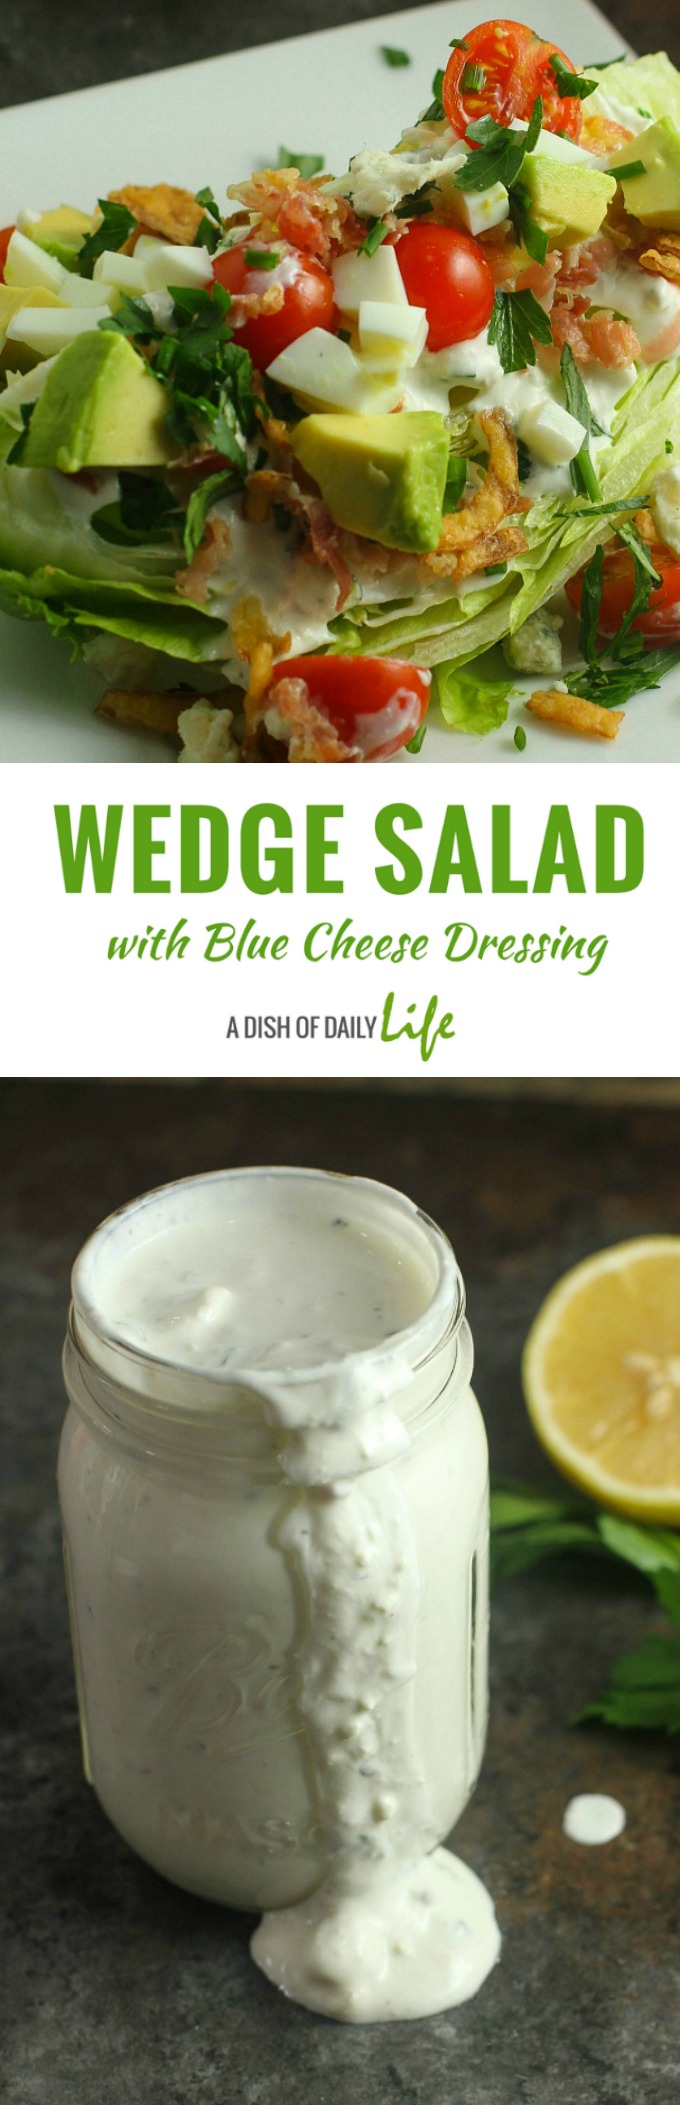 This Wedge Salad is topped with the most AH-MAZING Blue Cheese Dressing in this elegant dinner party menu! #salad #WedgeSalad #BlueCheeseDressing